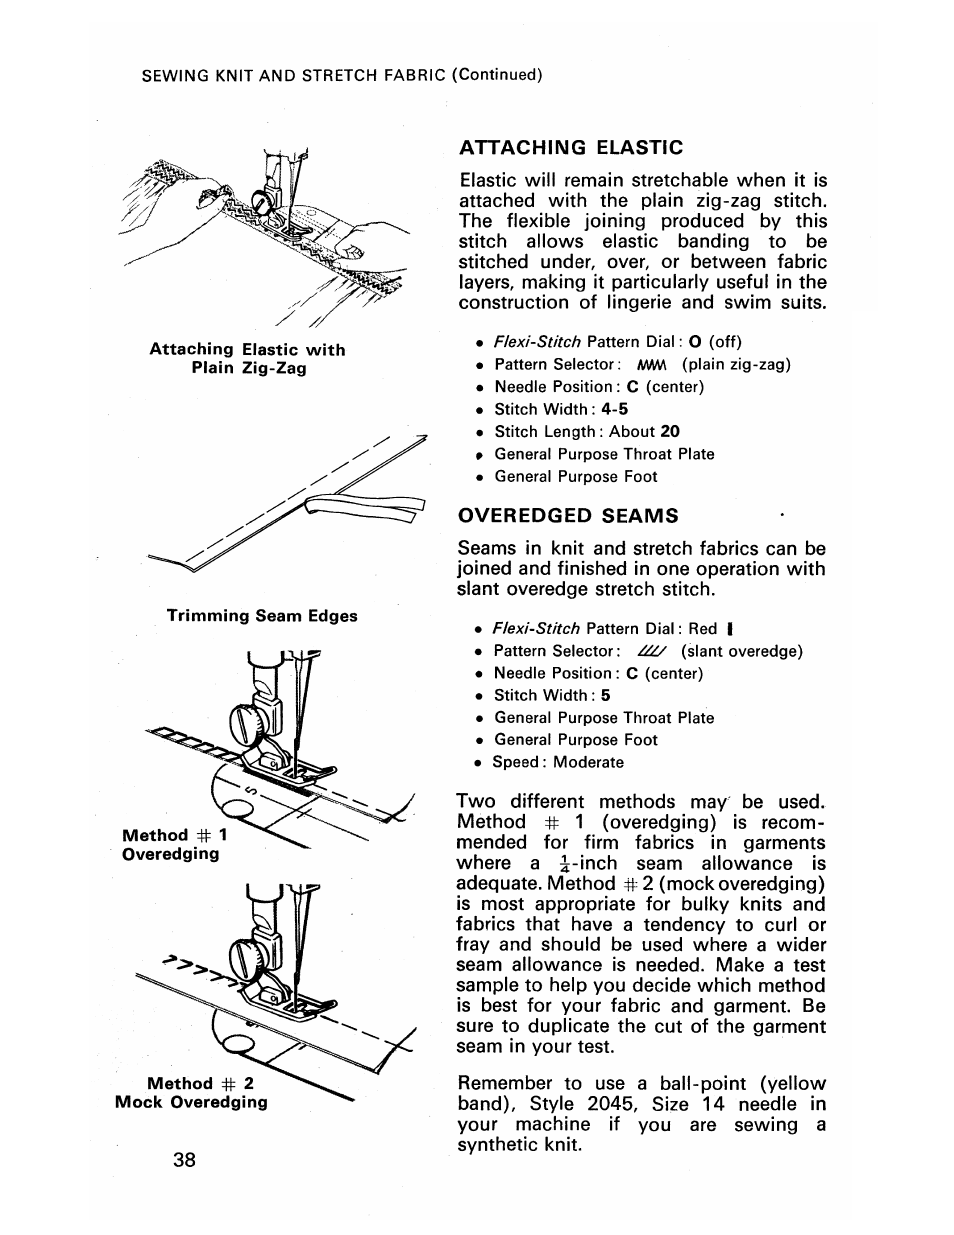 Attaching elastic, Overedged seams | SINGER 413 User Manual | Page 40 / 64